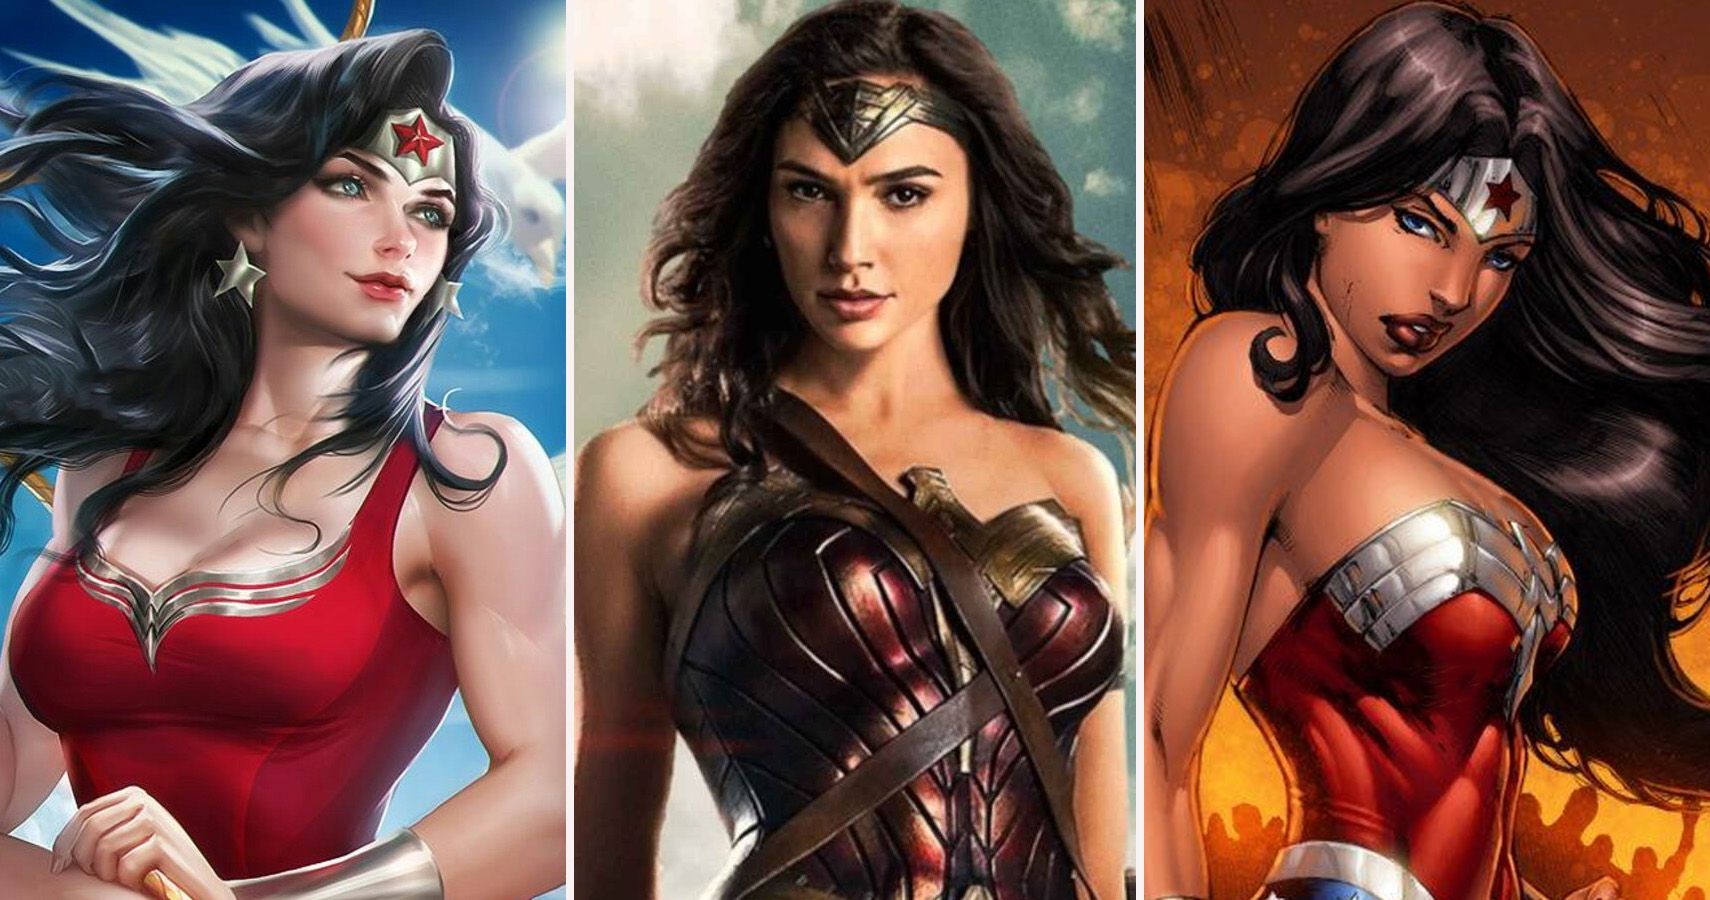 25 Surprising Things You Didn’t Know About Wonder Woman